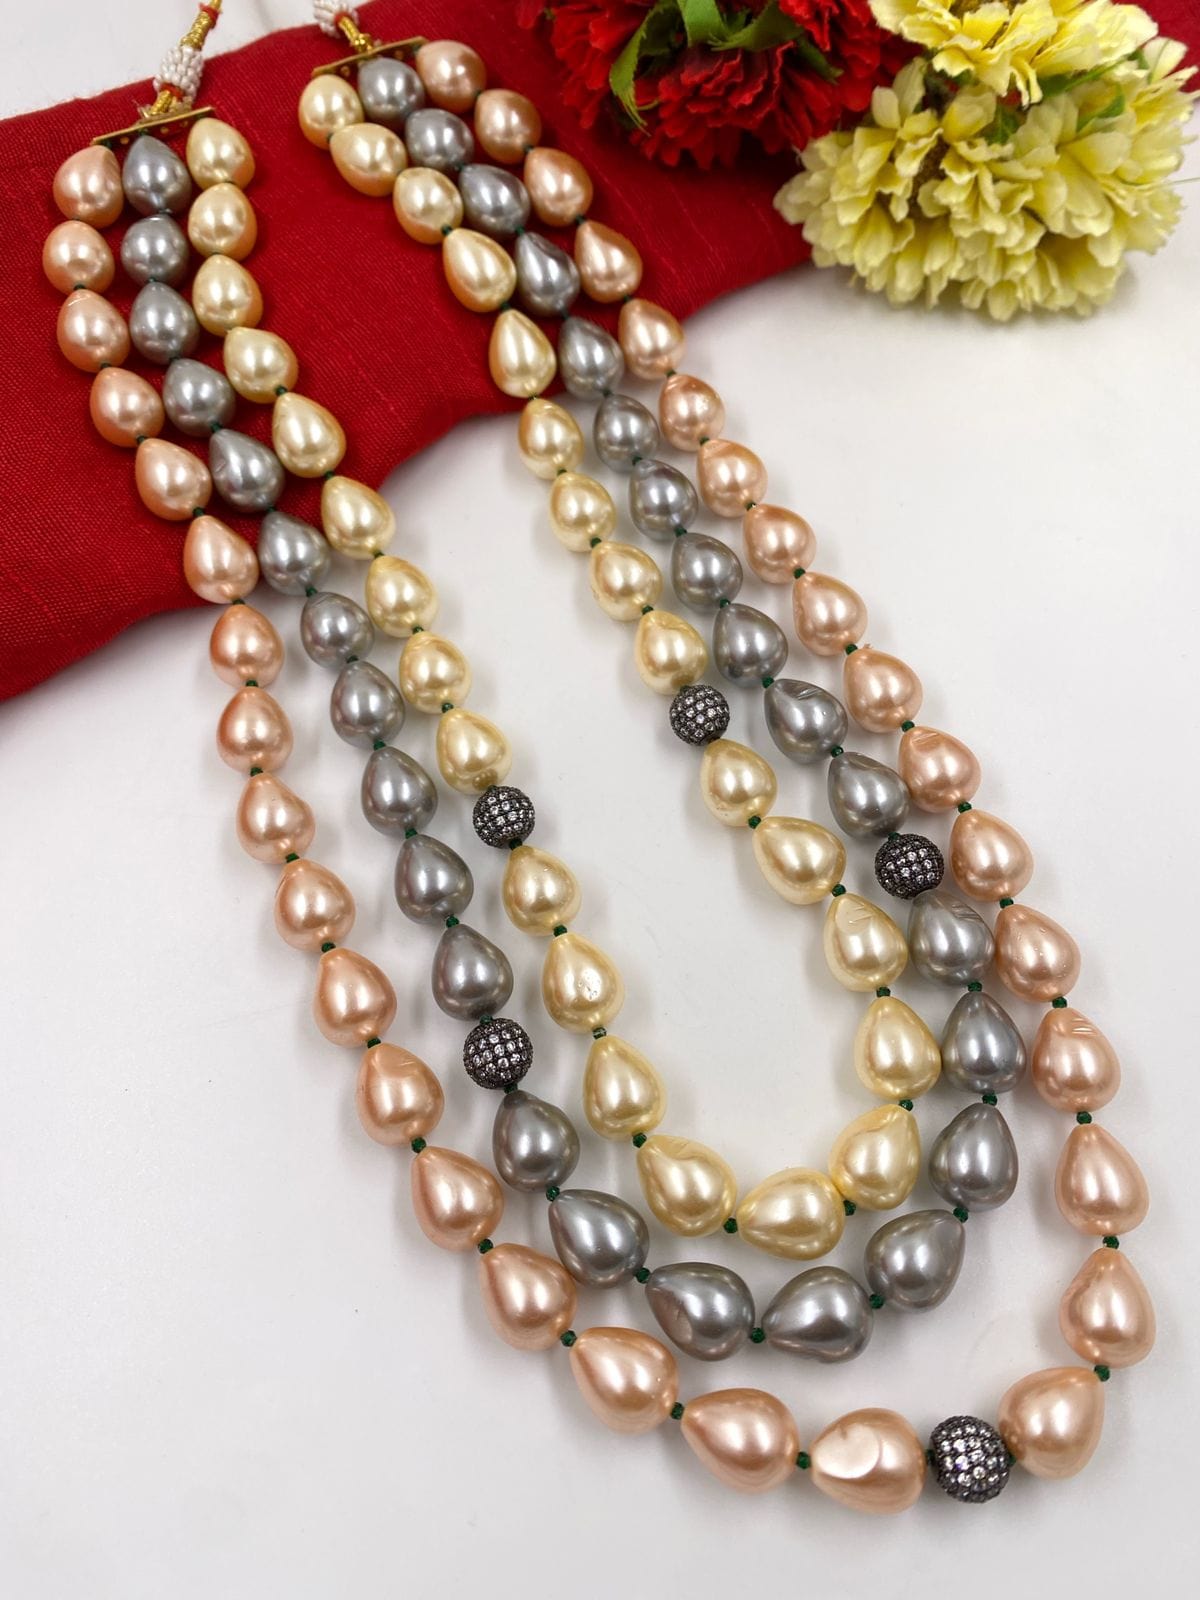 Pearl jewelry as one of jewelry trends 2021 | Pearl Jewelry Expert